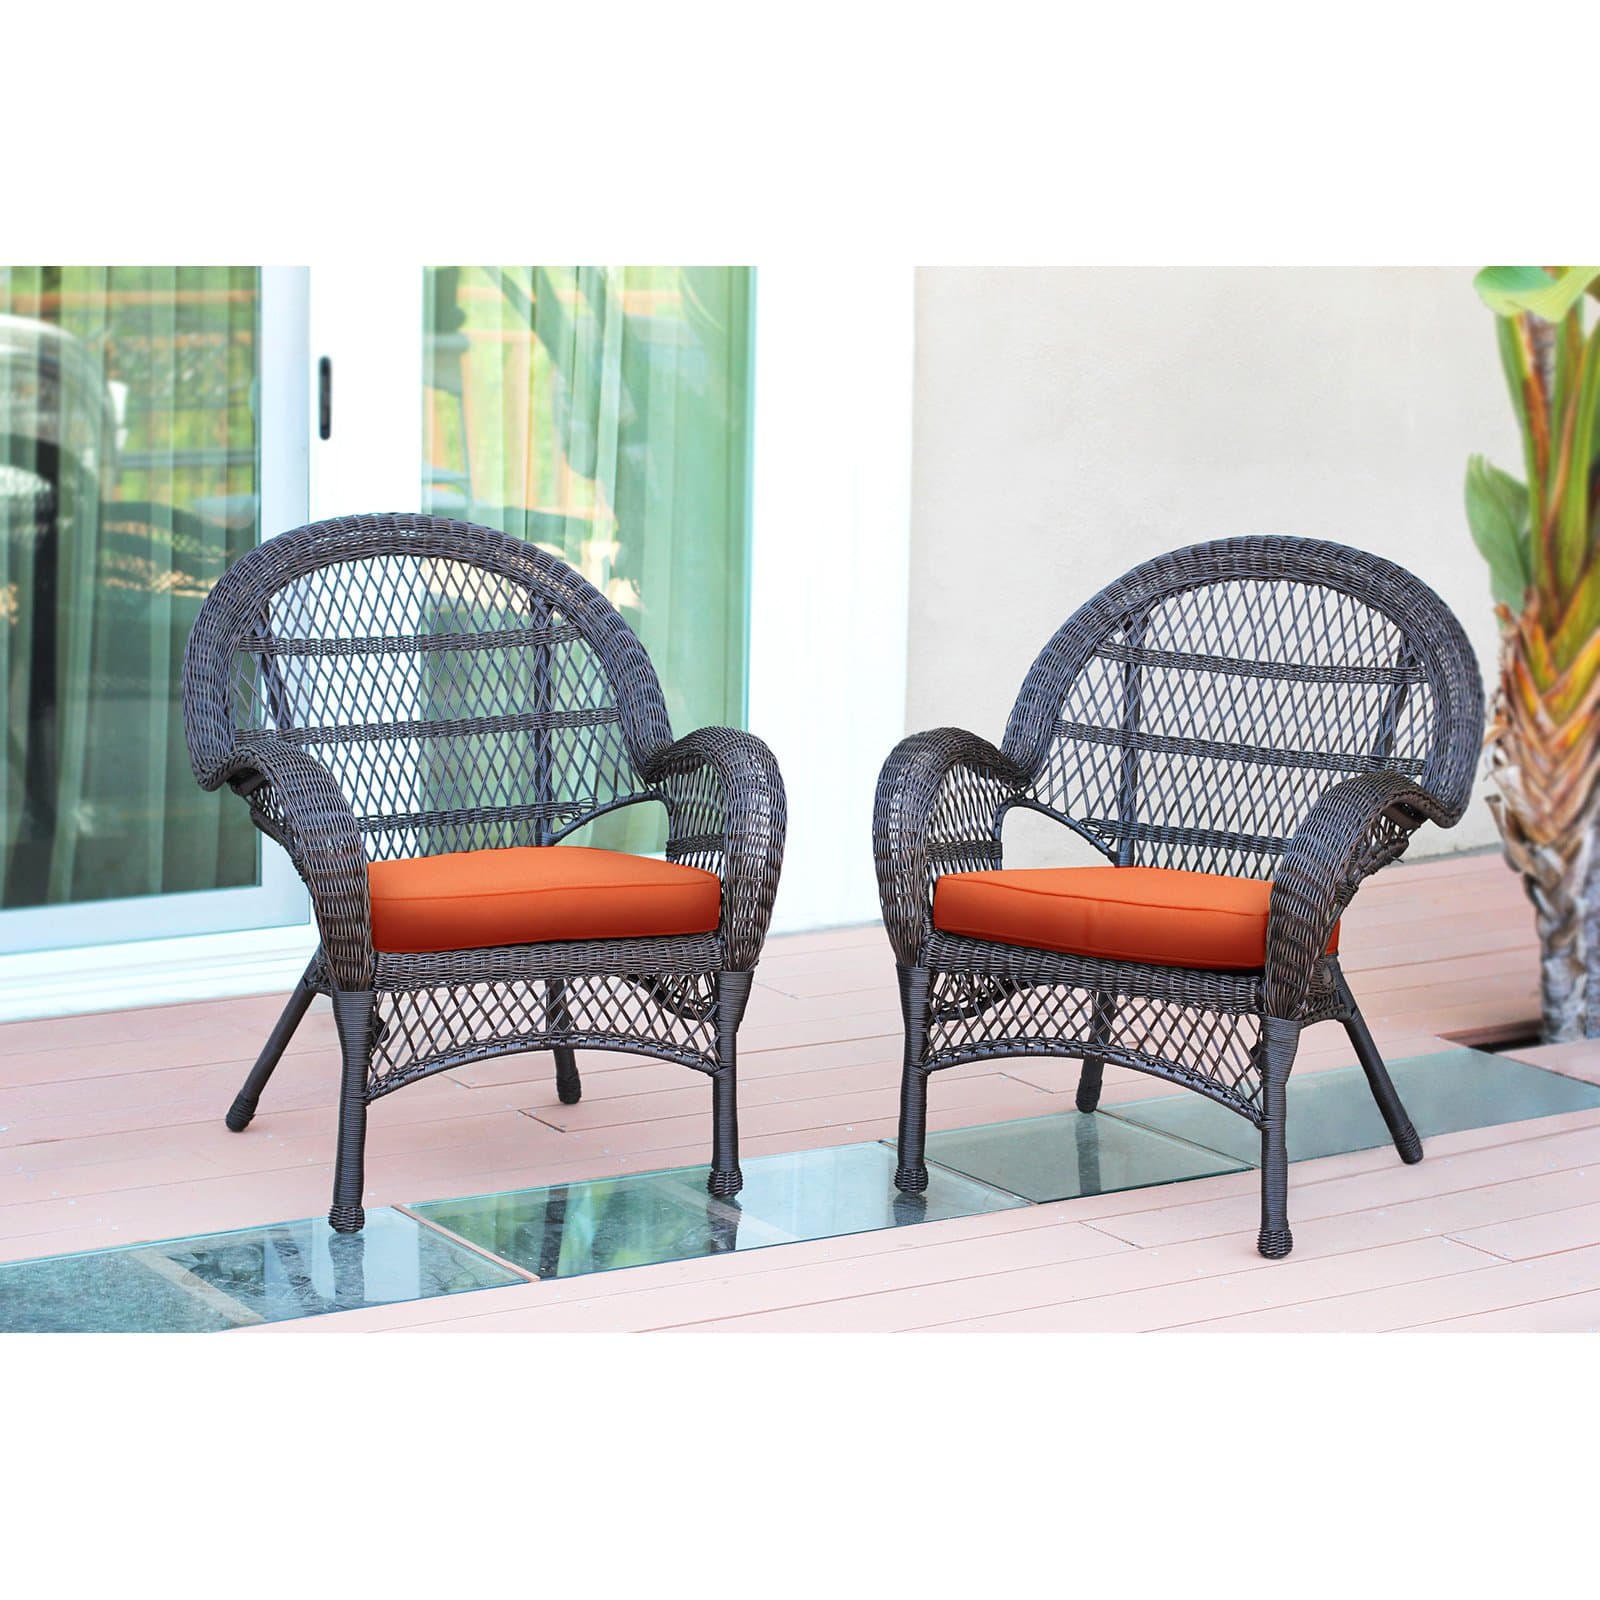 Jeco Wicker Chair in Espresso with Green Cushion (Set of 2) - image 4 of 11